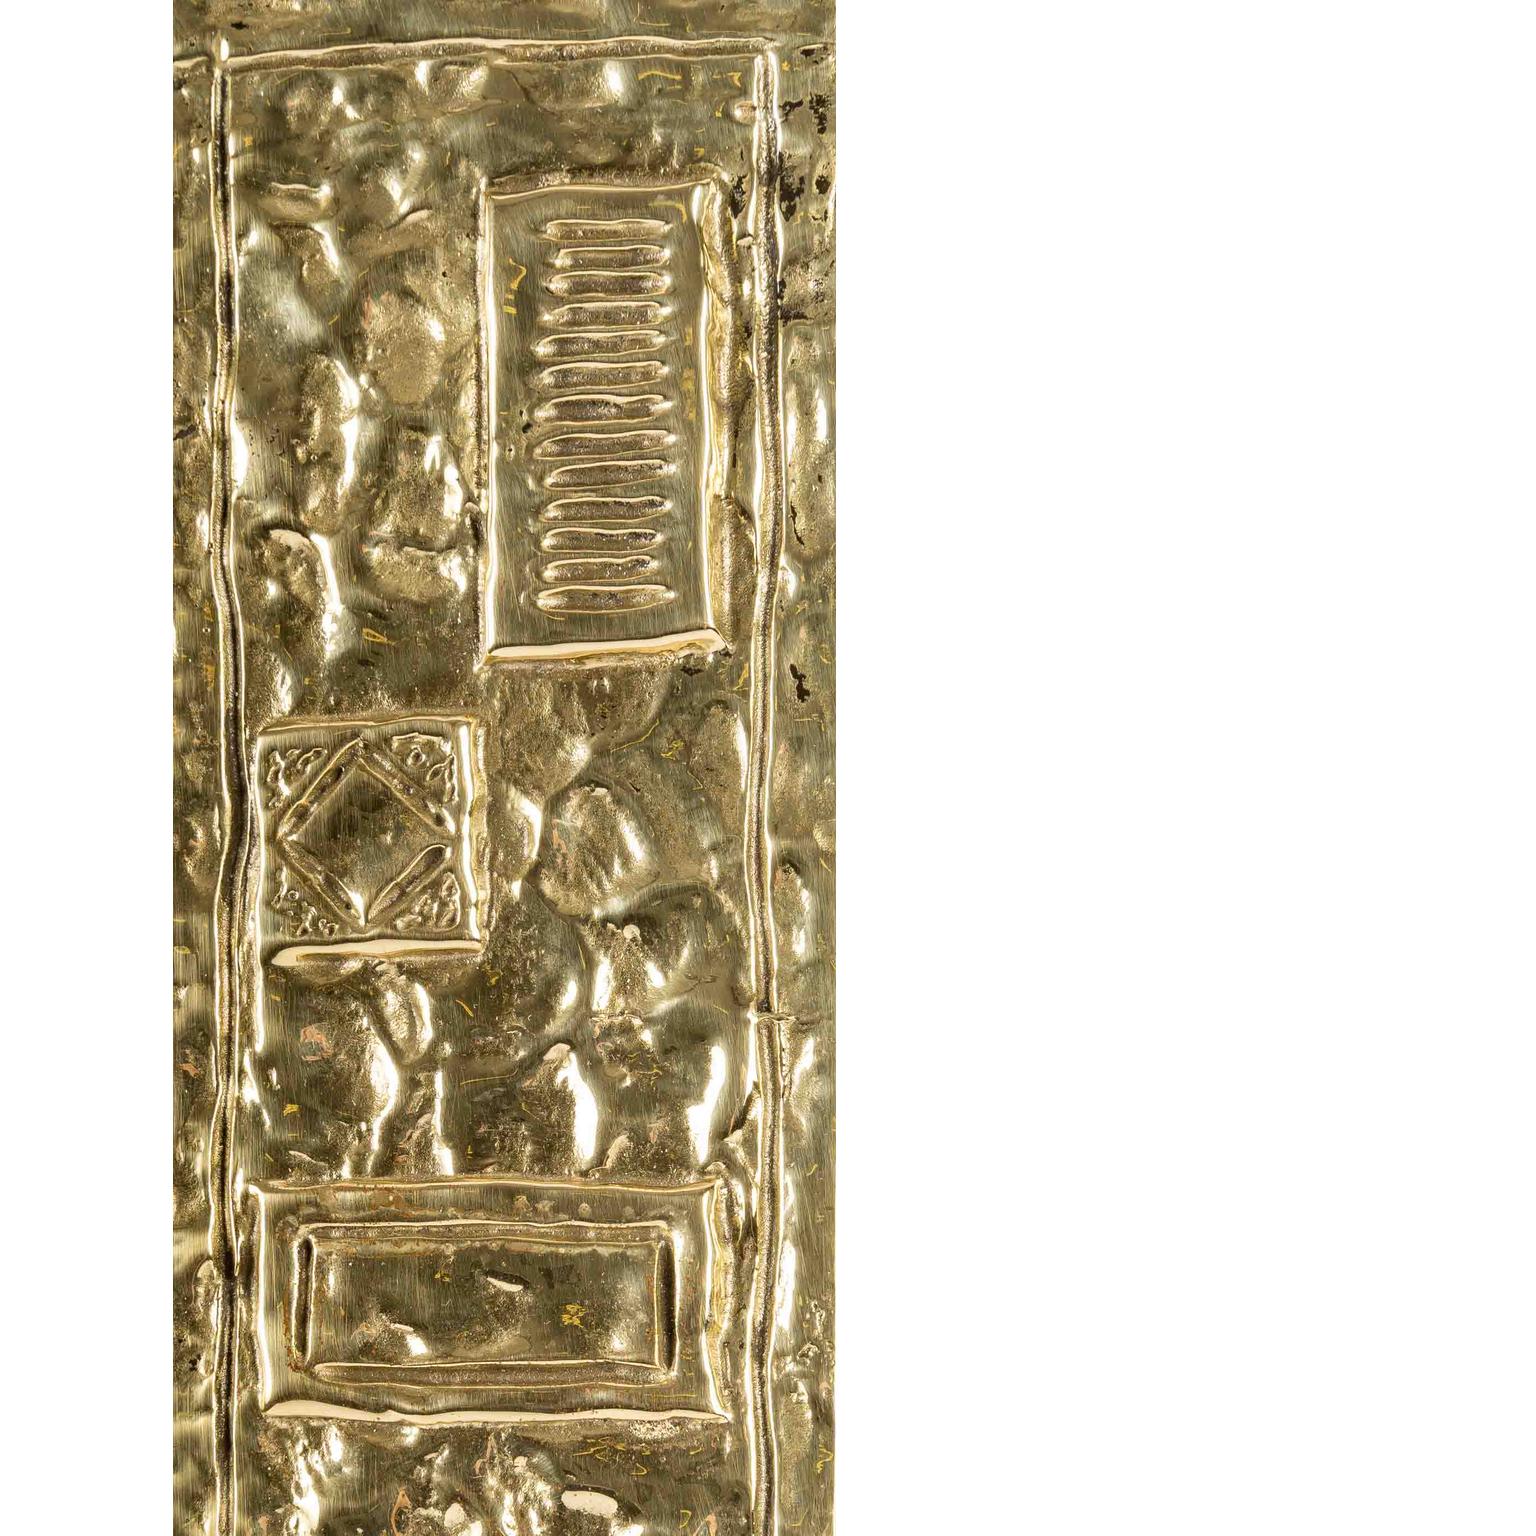 The mirror of rectangular form in height presents a border in gilded bronze decorated with geometrical cartridges in gilded bronze on all the height of the right part of the mirror.
It is signed on the facade in the lower part.